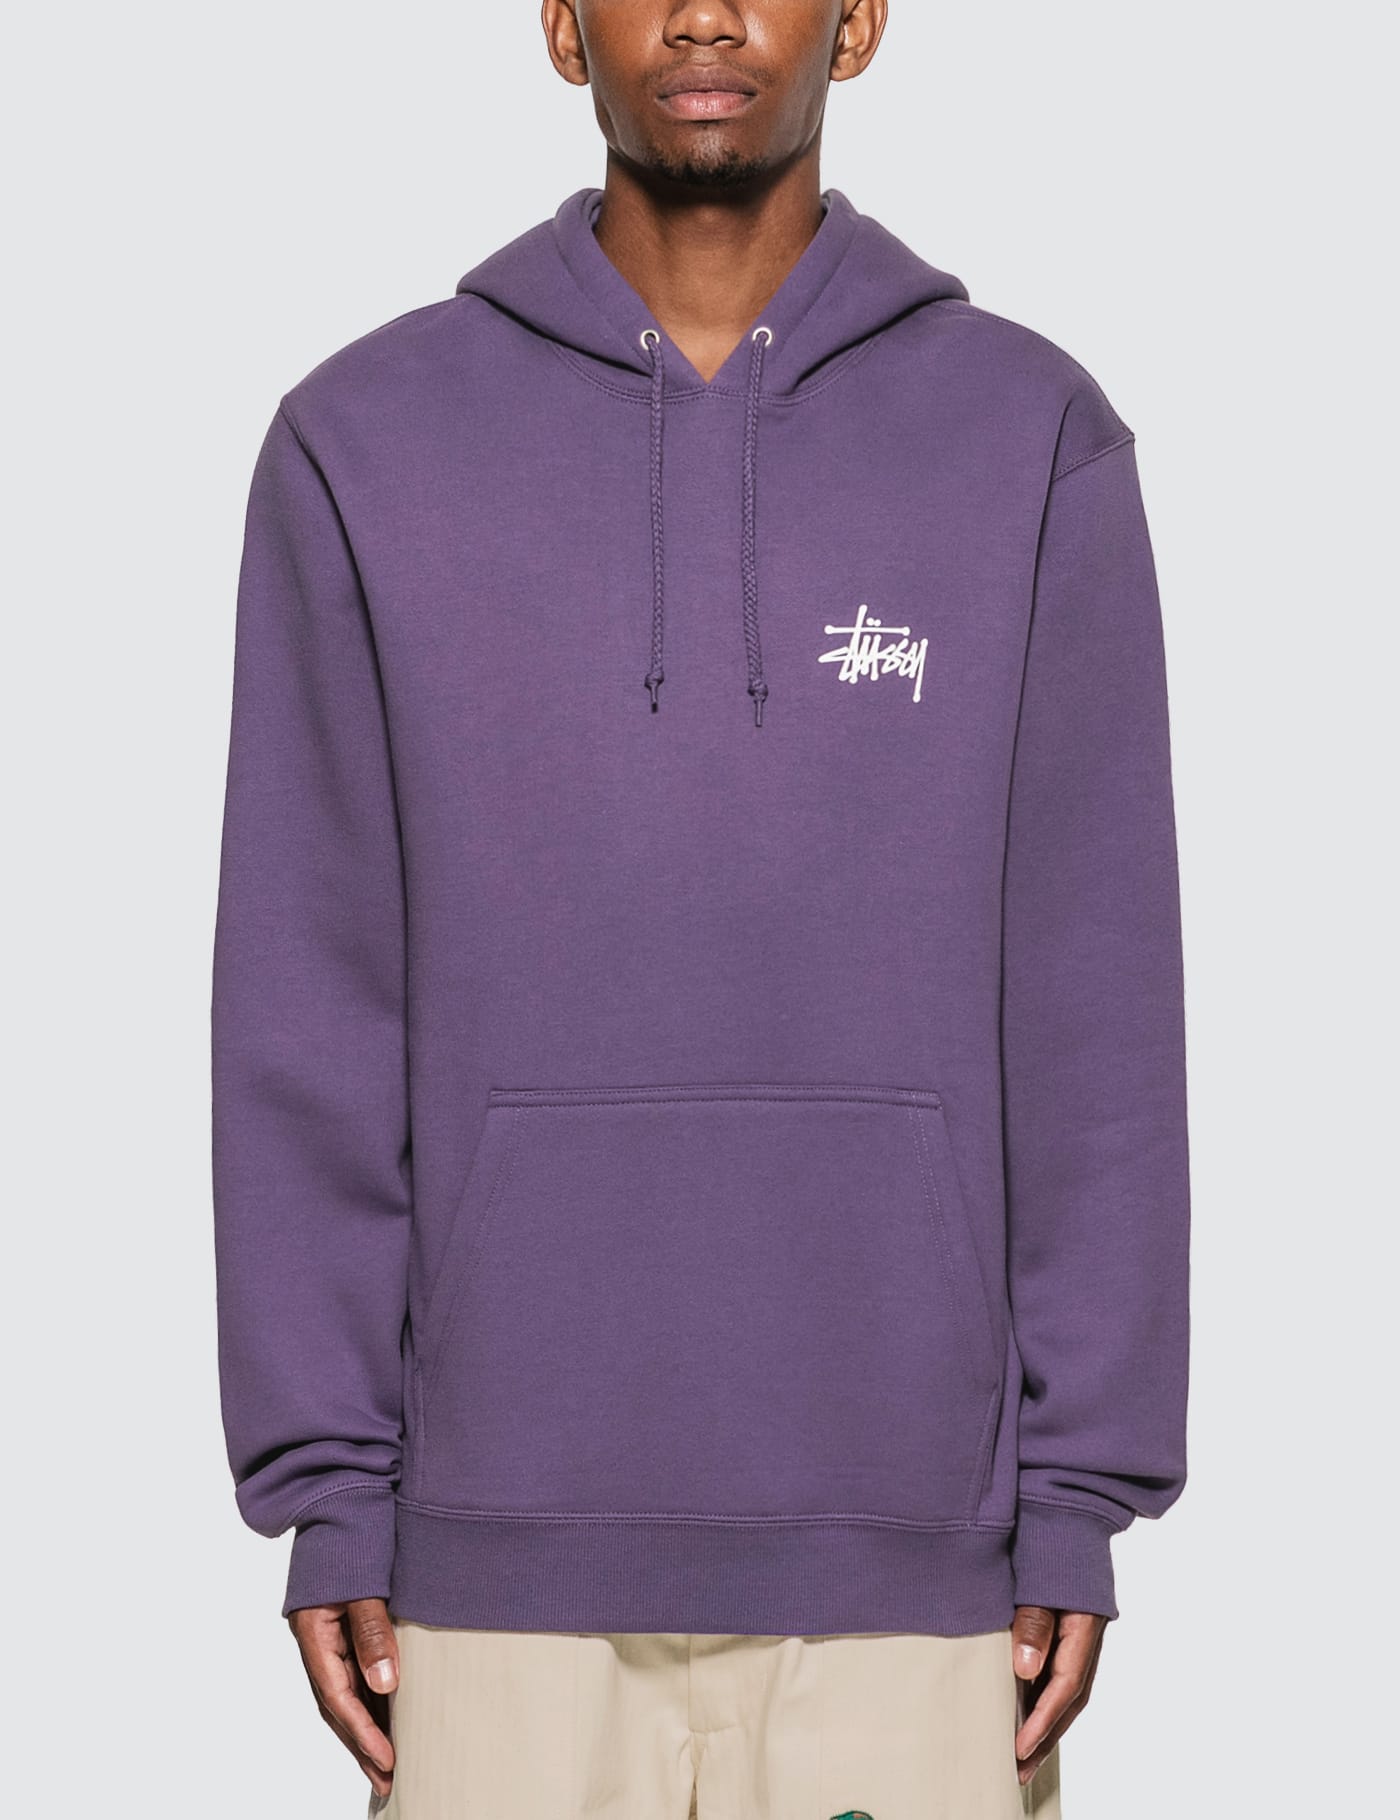 Stüssy - Basic Stussy Hoodie | HBX - Globally Curated Fashion and 